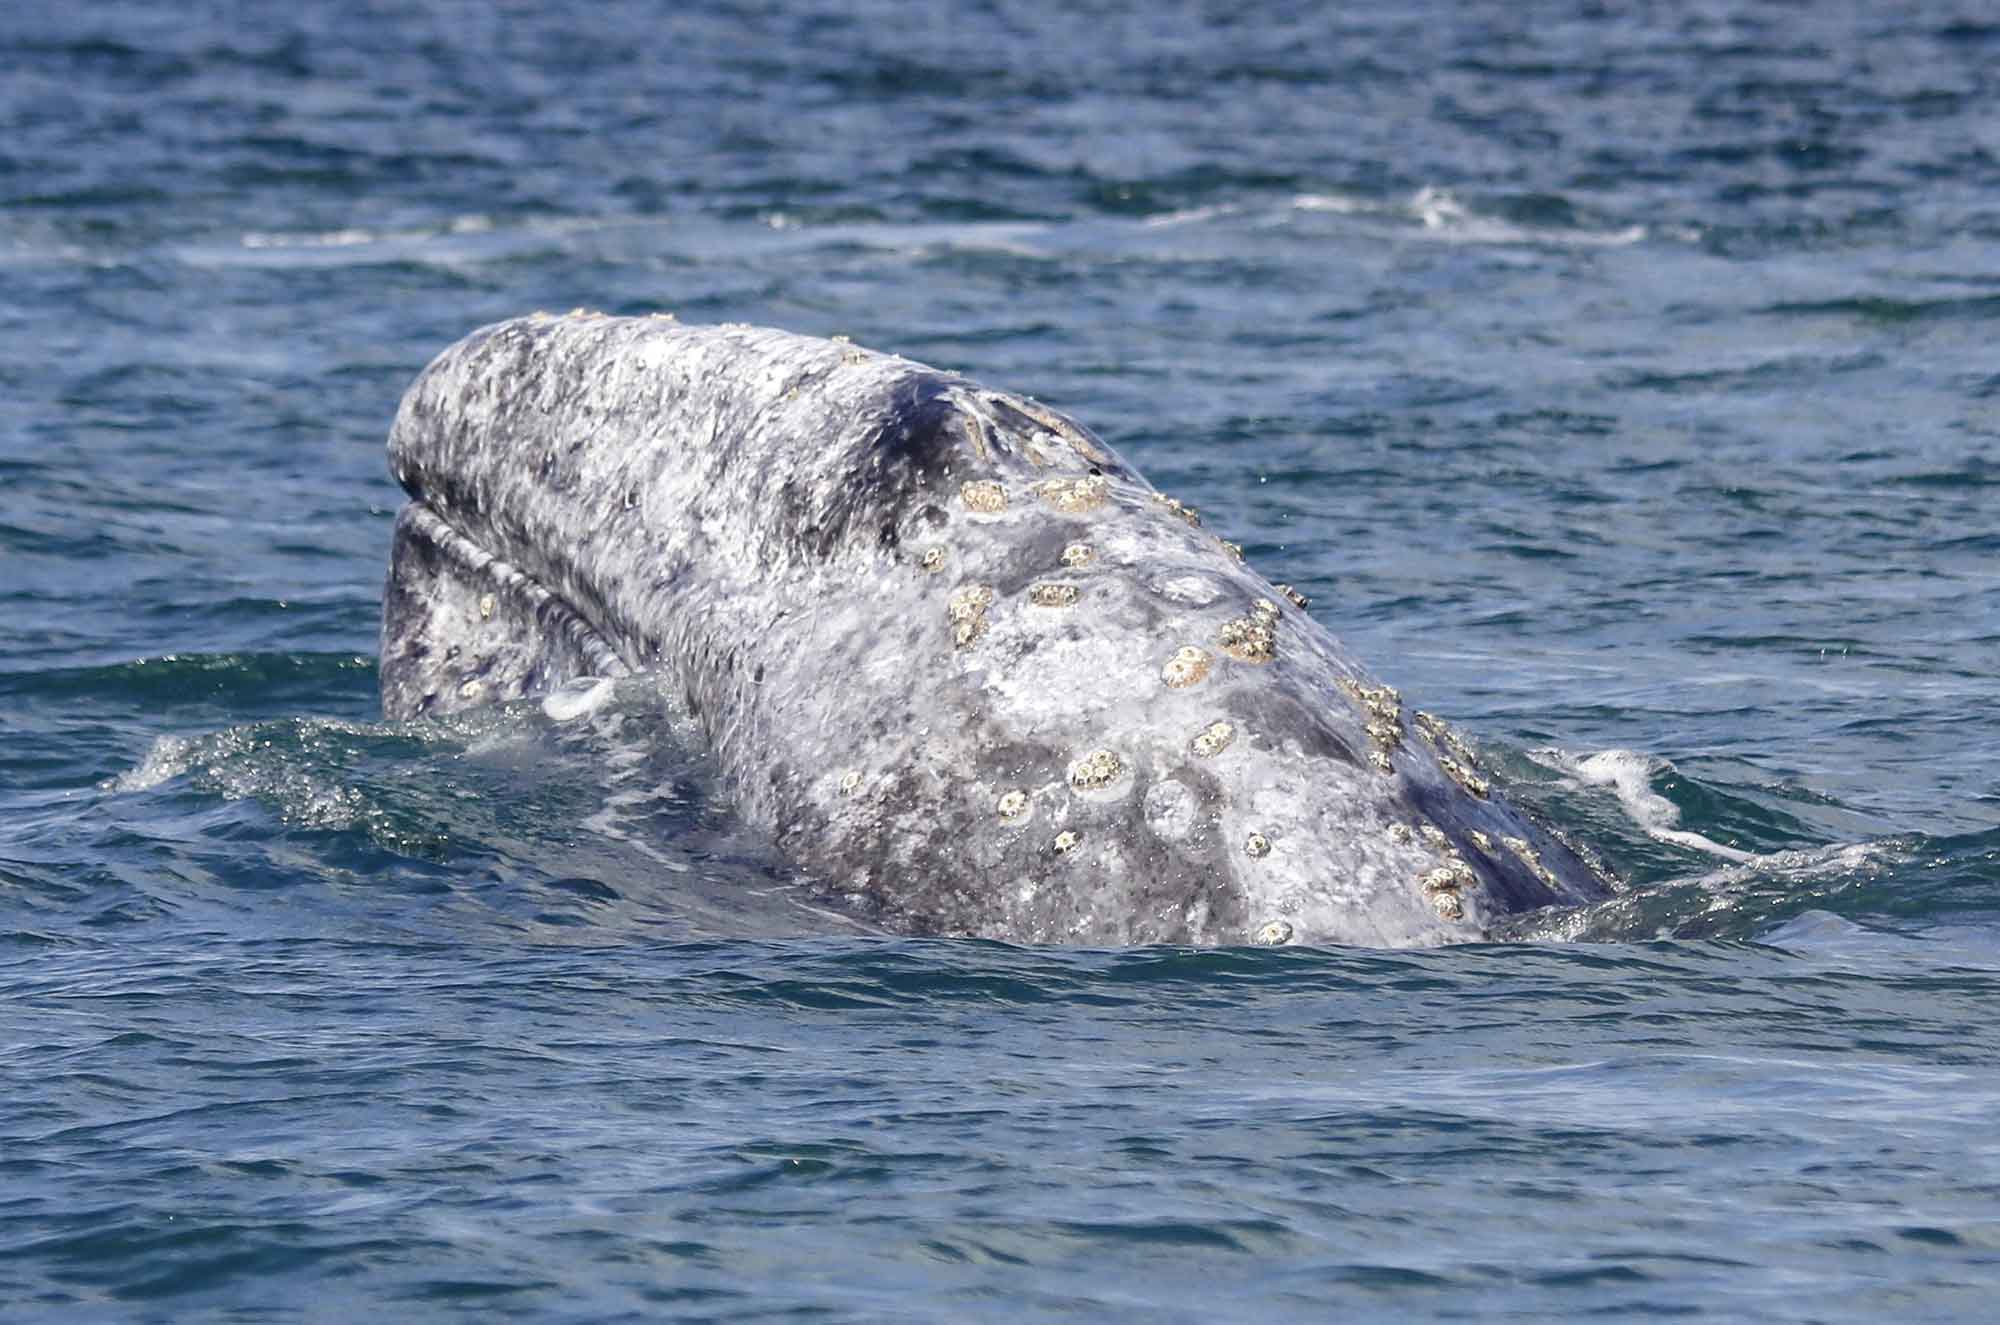 Gray whales are a migratory species seen during the winter months in San Diego.